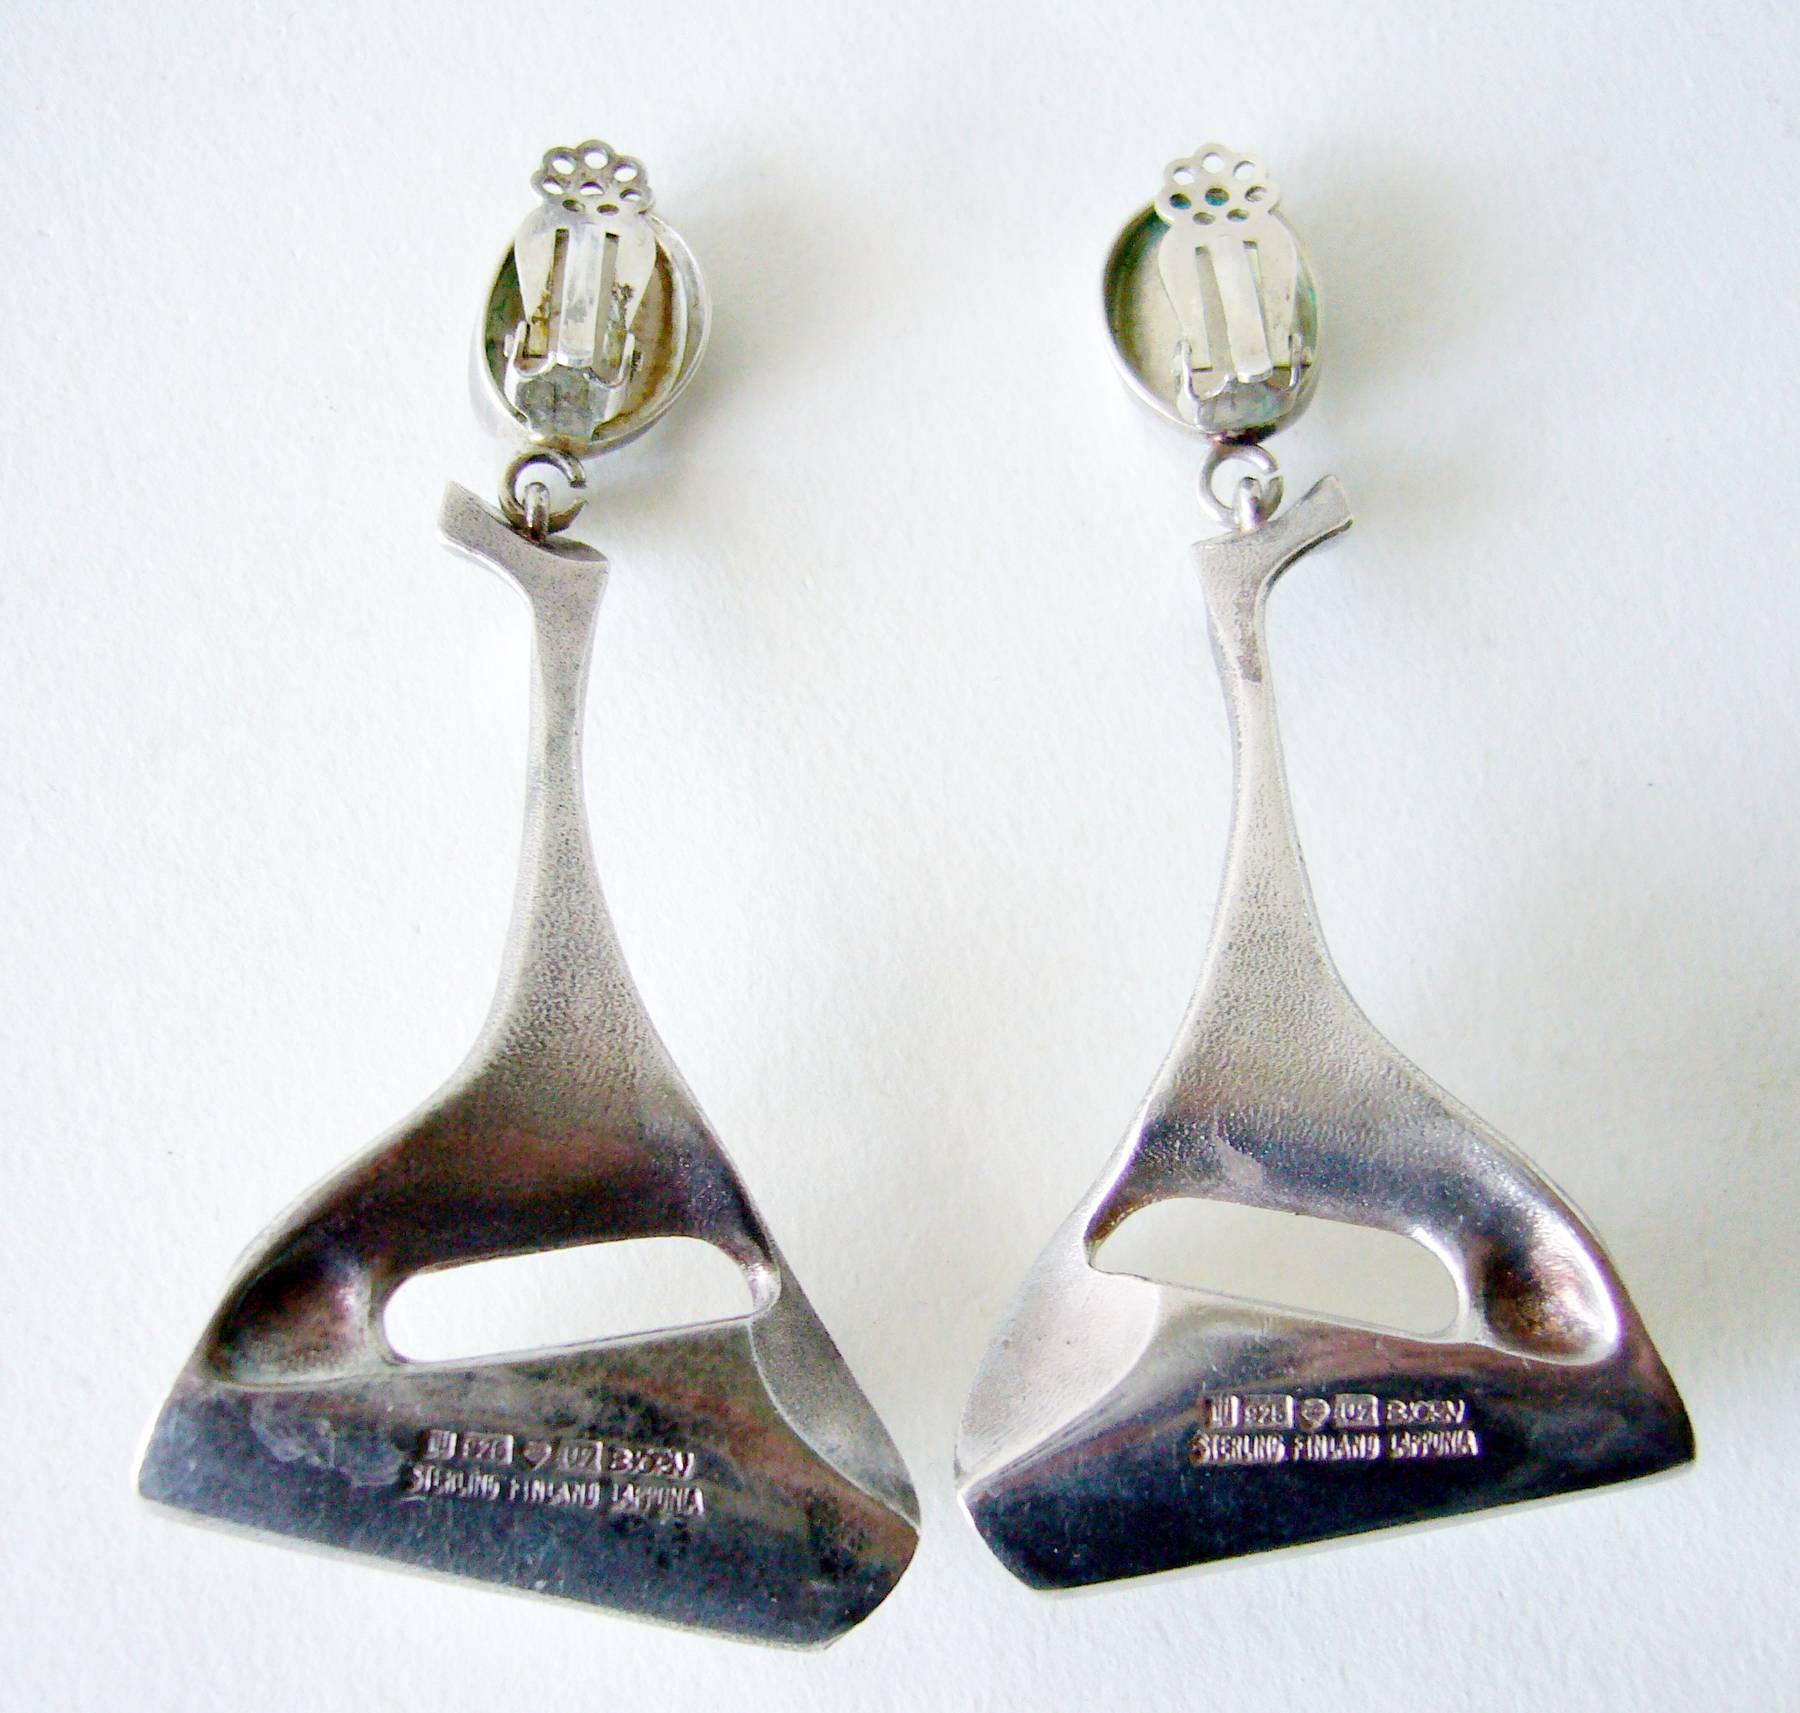 Sterling silver space age earrings created by Finland's master jeweler and sculptor Bjorn Weckstrom.  Earrings measure 3" in length by 1.25" at their widest measurement.  They are of clip back variety and have a soft matte finish to the